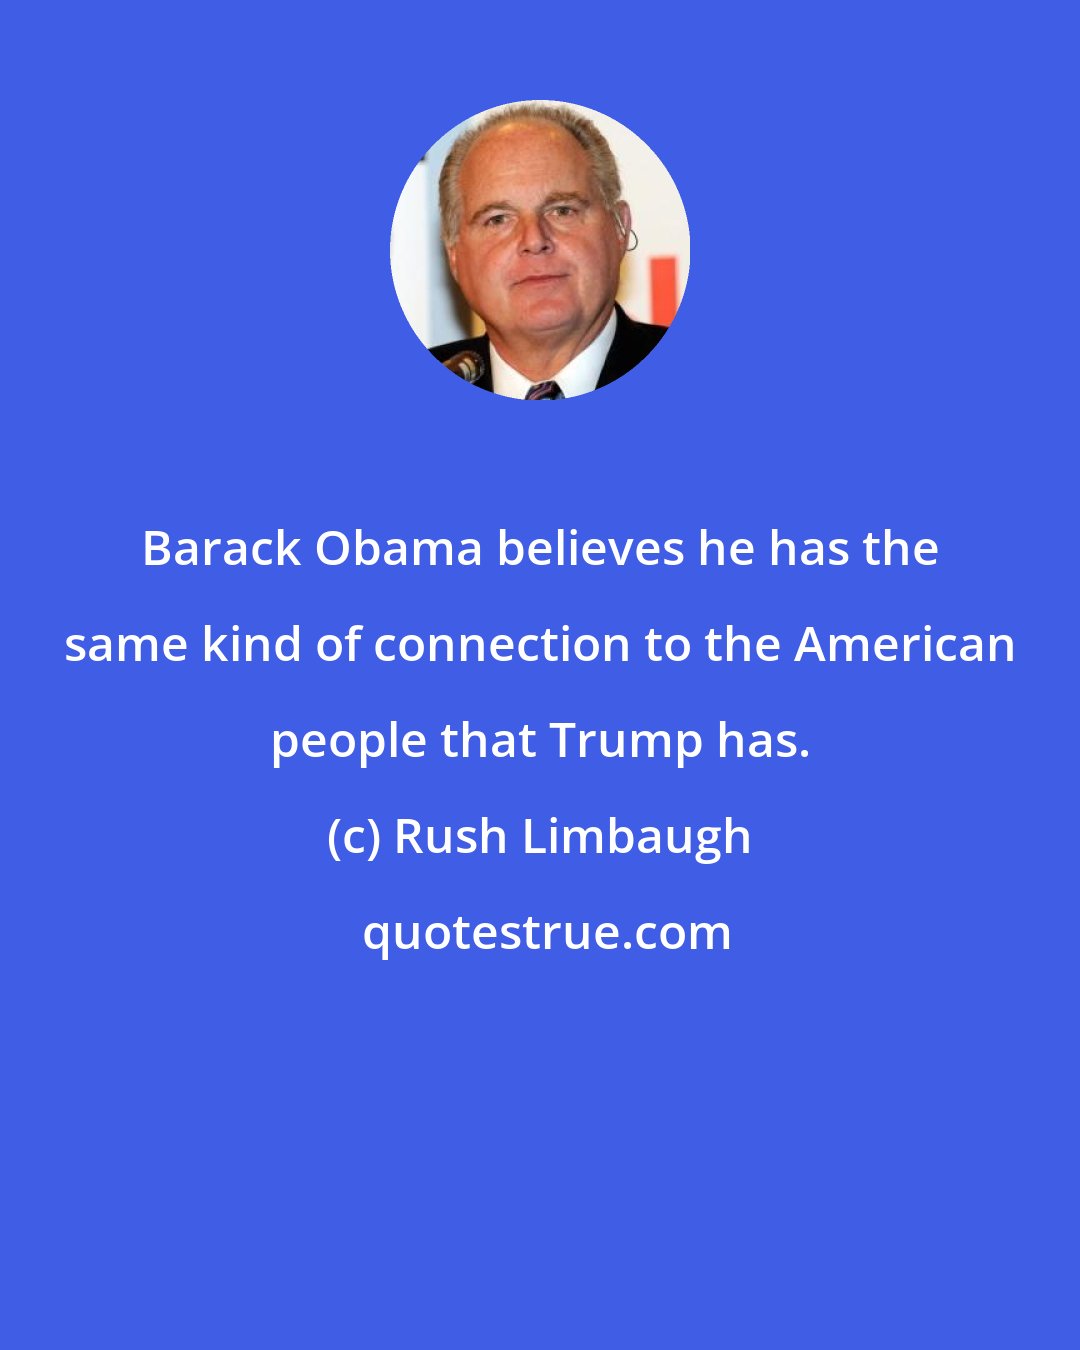 Rush Limbaugh: Barack Obama believes he has the same kind of connection to the American people that Trump has.